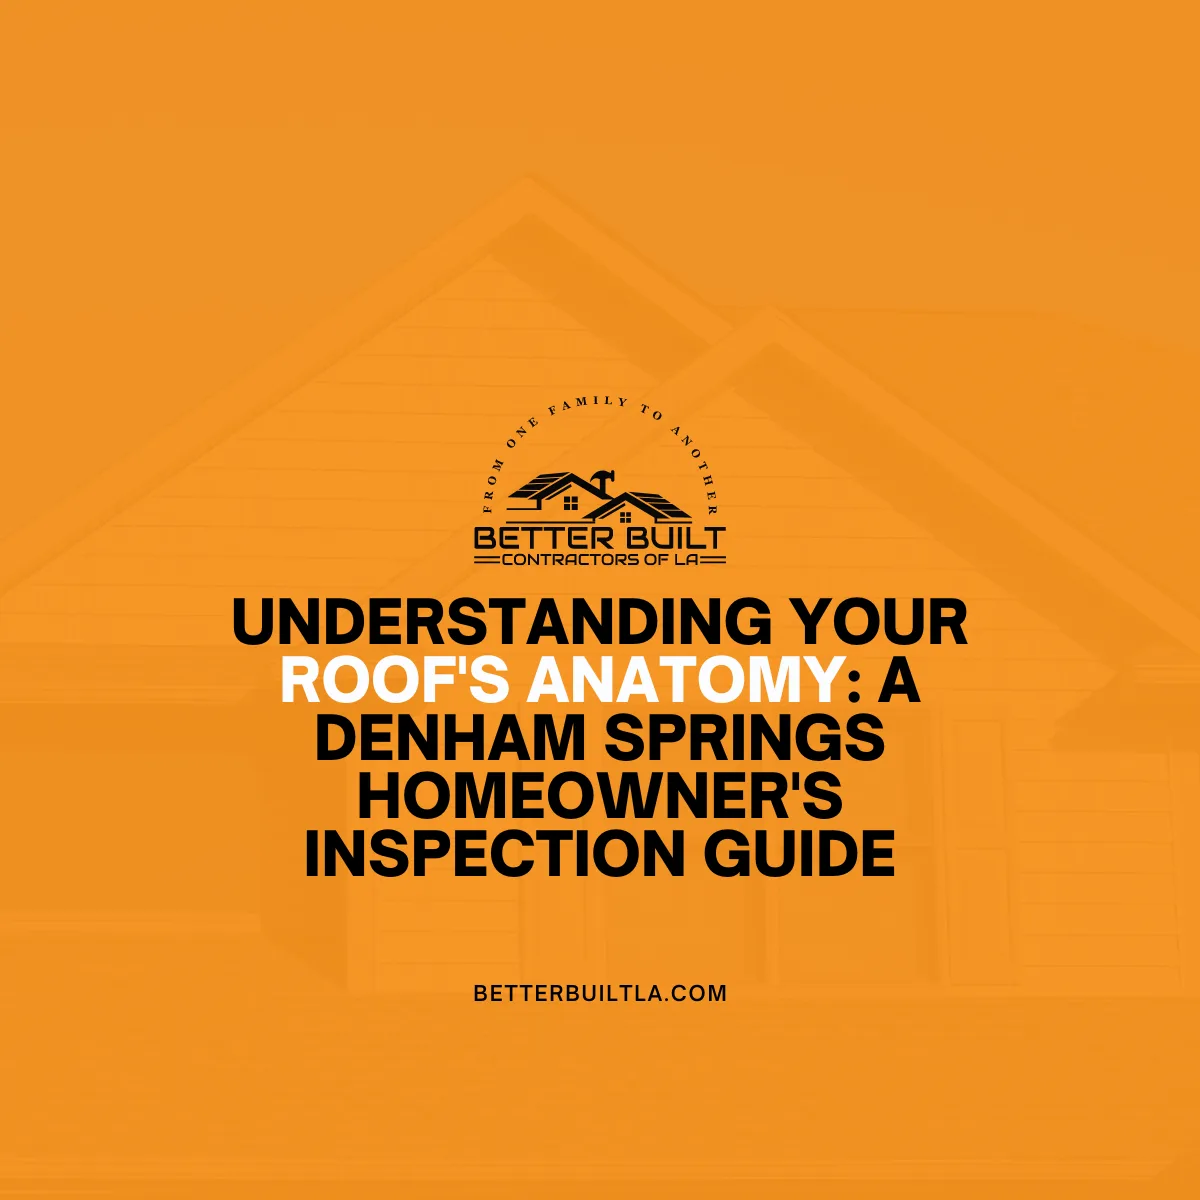 Understanding Your Roof’s Anatomy: A Denham Springs Homeowner’s Inspection Guide